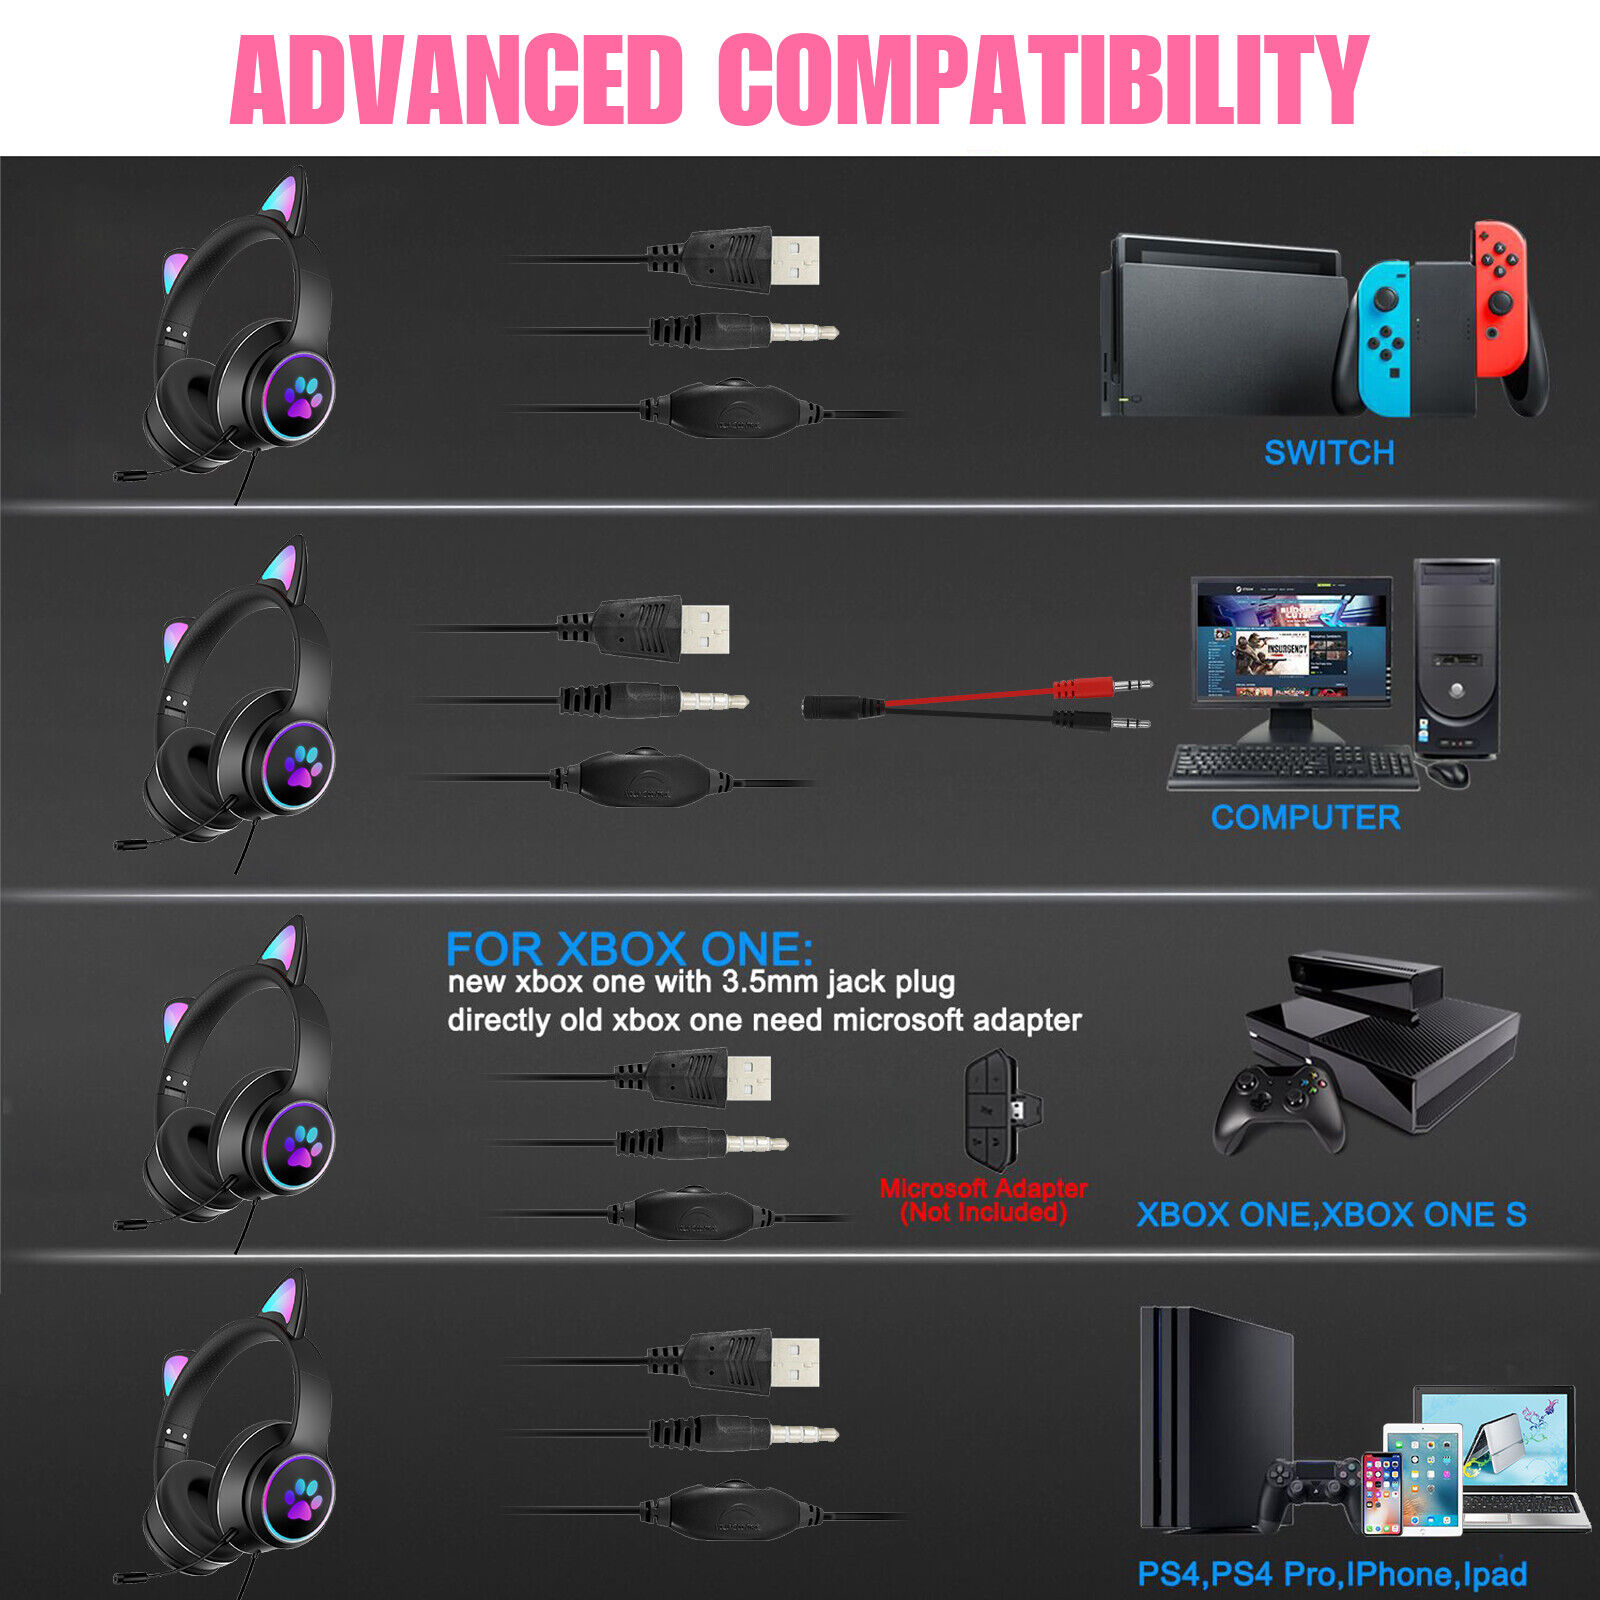 LED Gaming Headset with Cat Ears - PS4/PS5